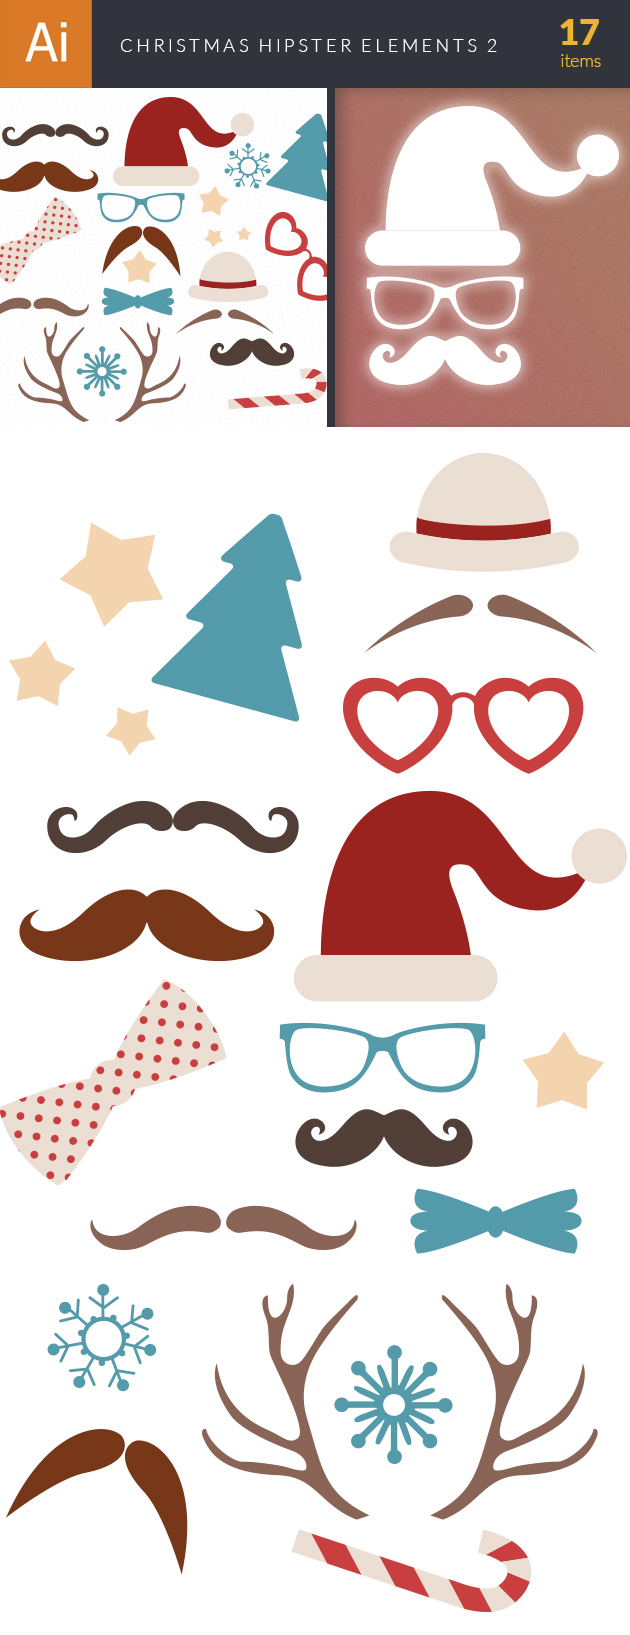 Christmas Hipster Elements Vector Set 2 33